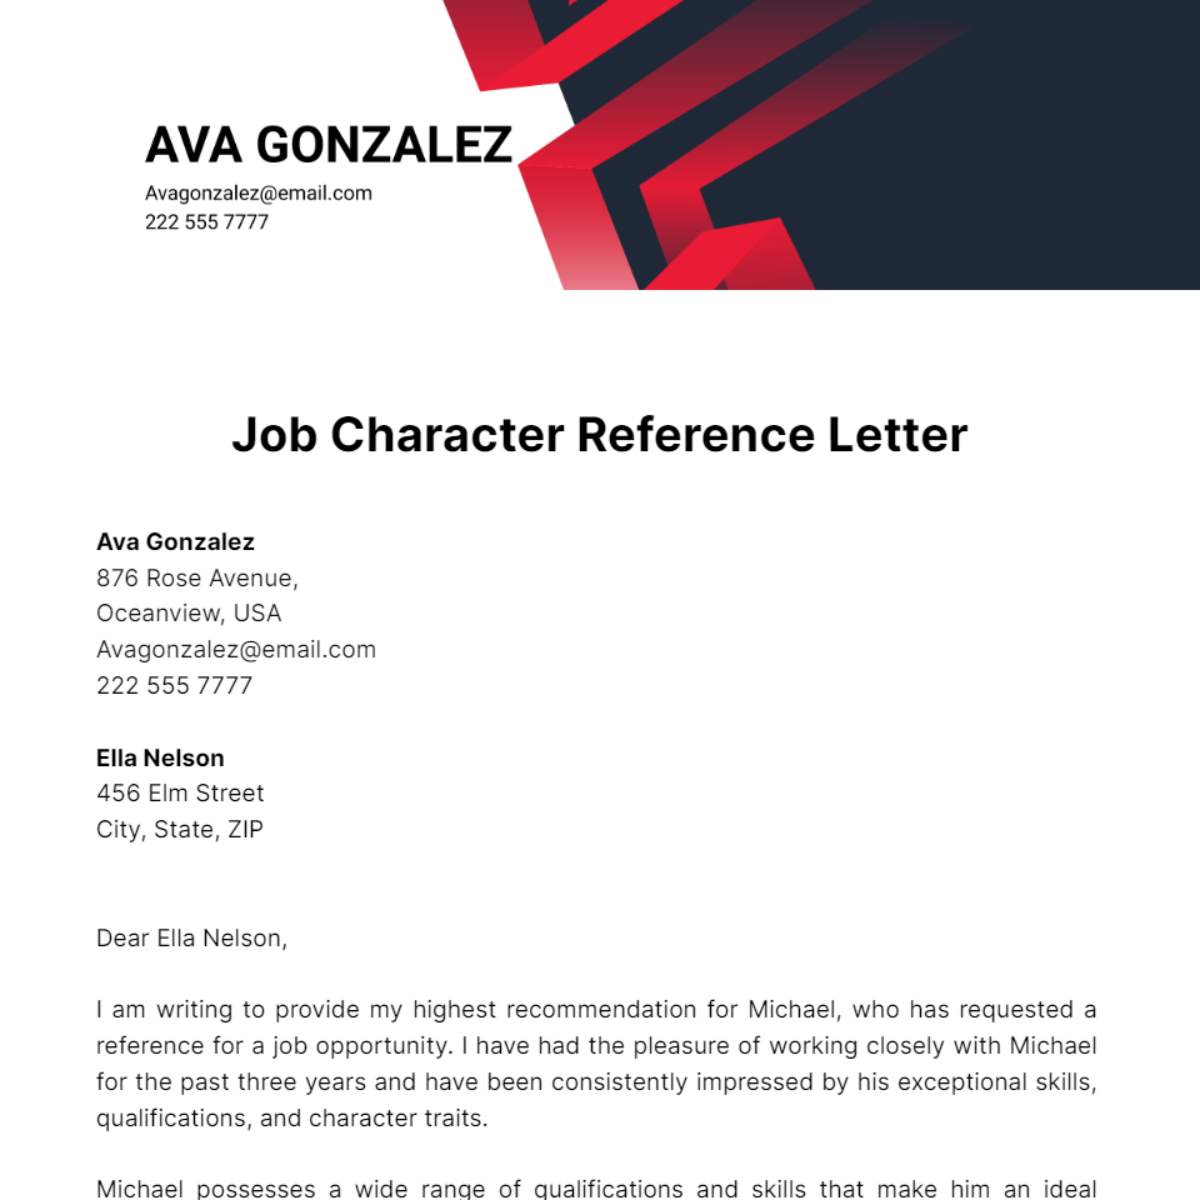 Job Character Reference Letter Template